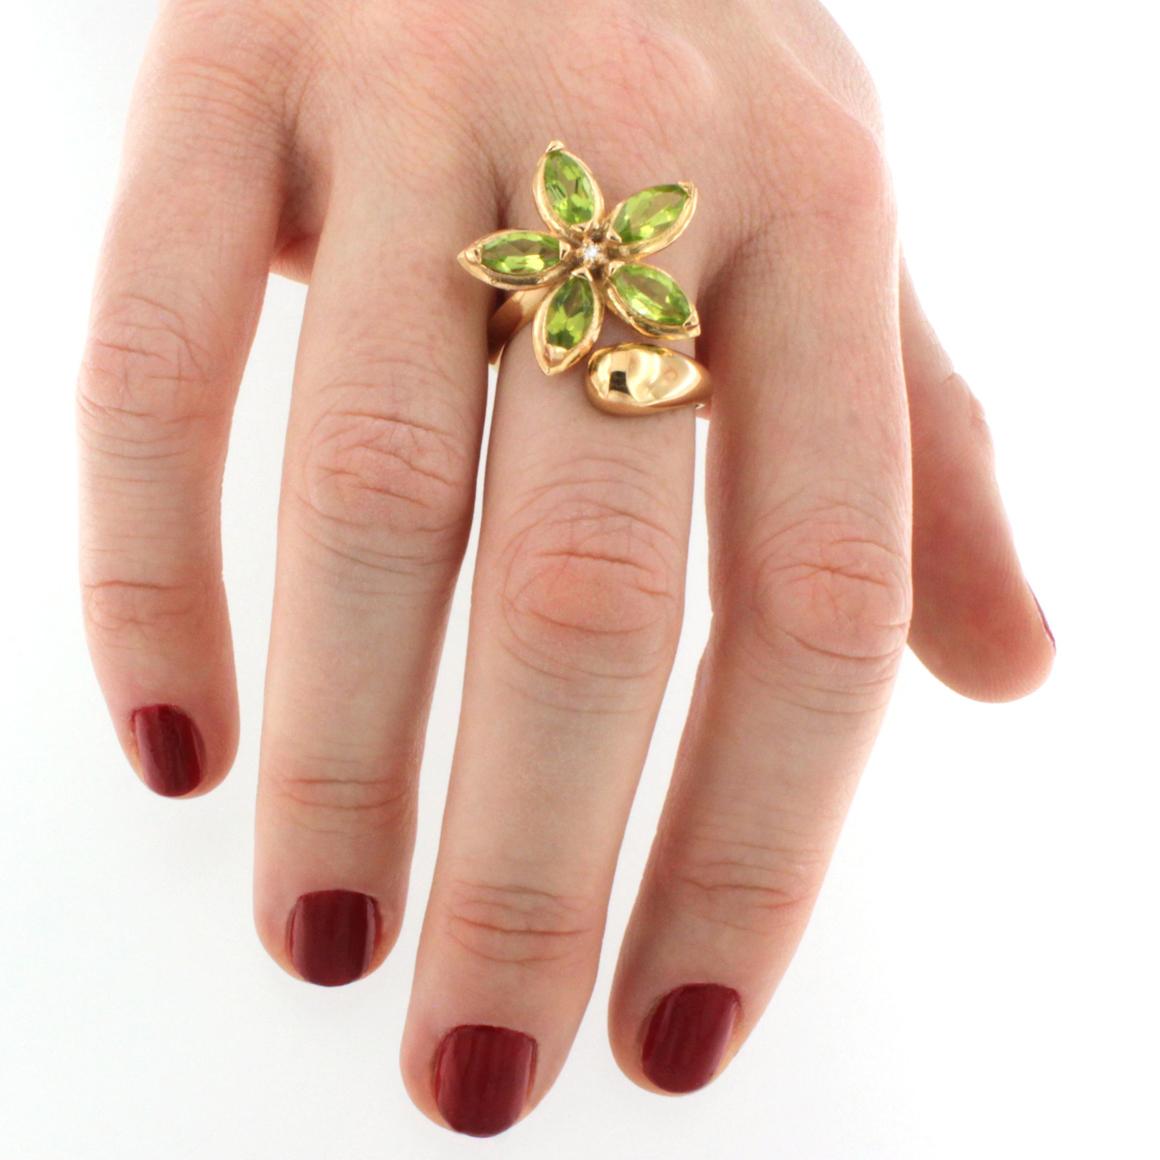 Sunflowers are symbols of sun and happiness. It takes inspiration from modern shapes and Nature
Ring in 18k rose gold with green Amethyst (marquise cut, size:4x7 mm) and white Diamond cts 0.02 VS colour G/H. 

Size of ring: EU 16 -  7 USA